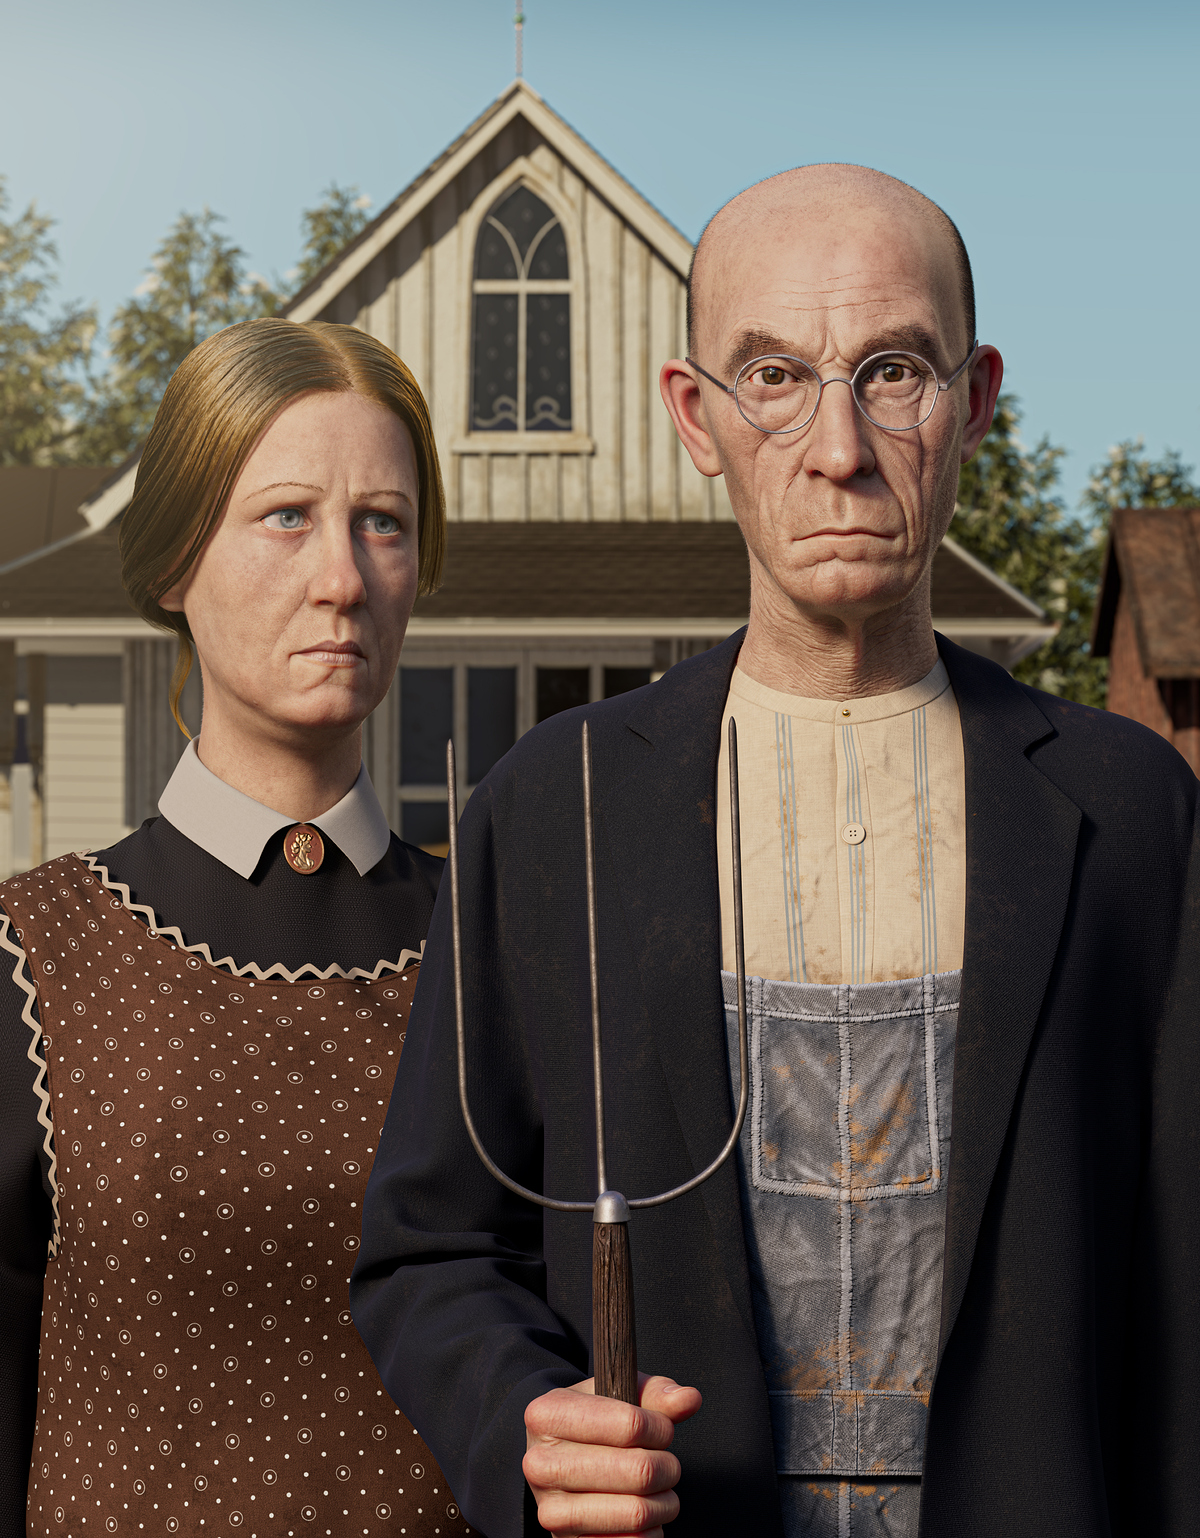 American_gothic_Final